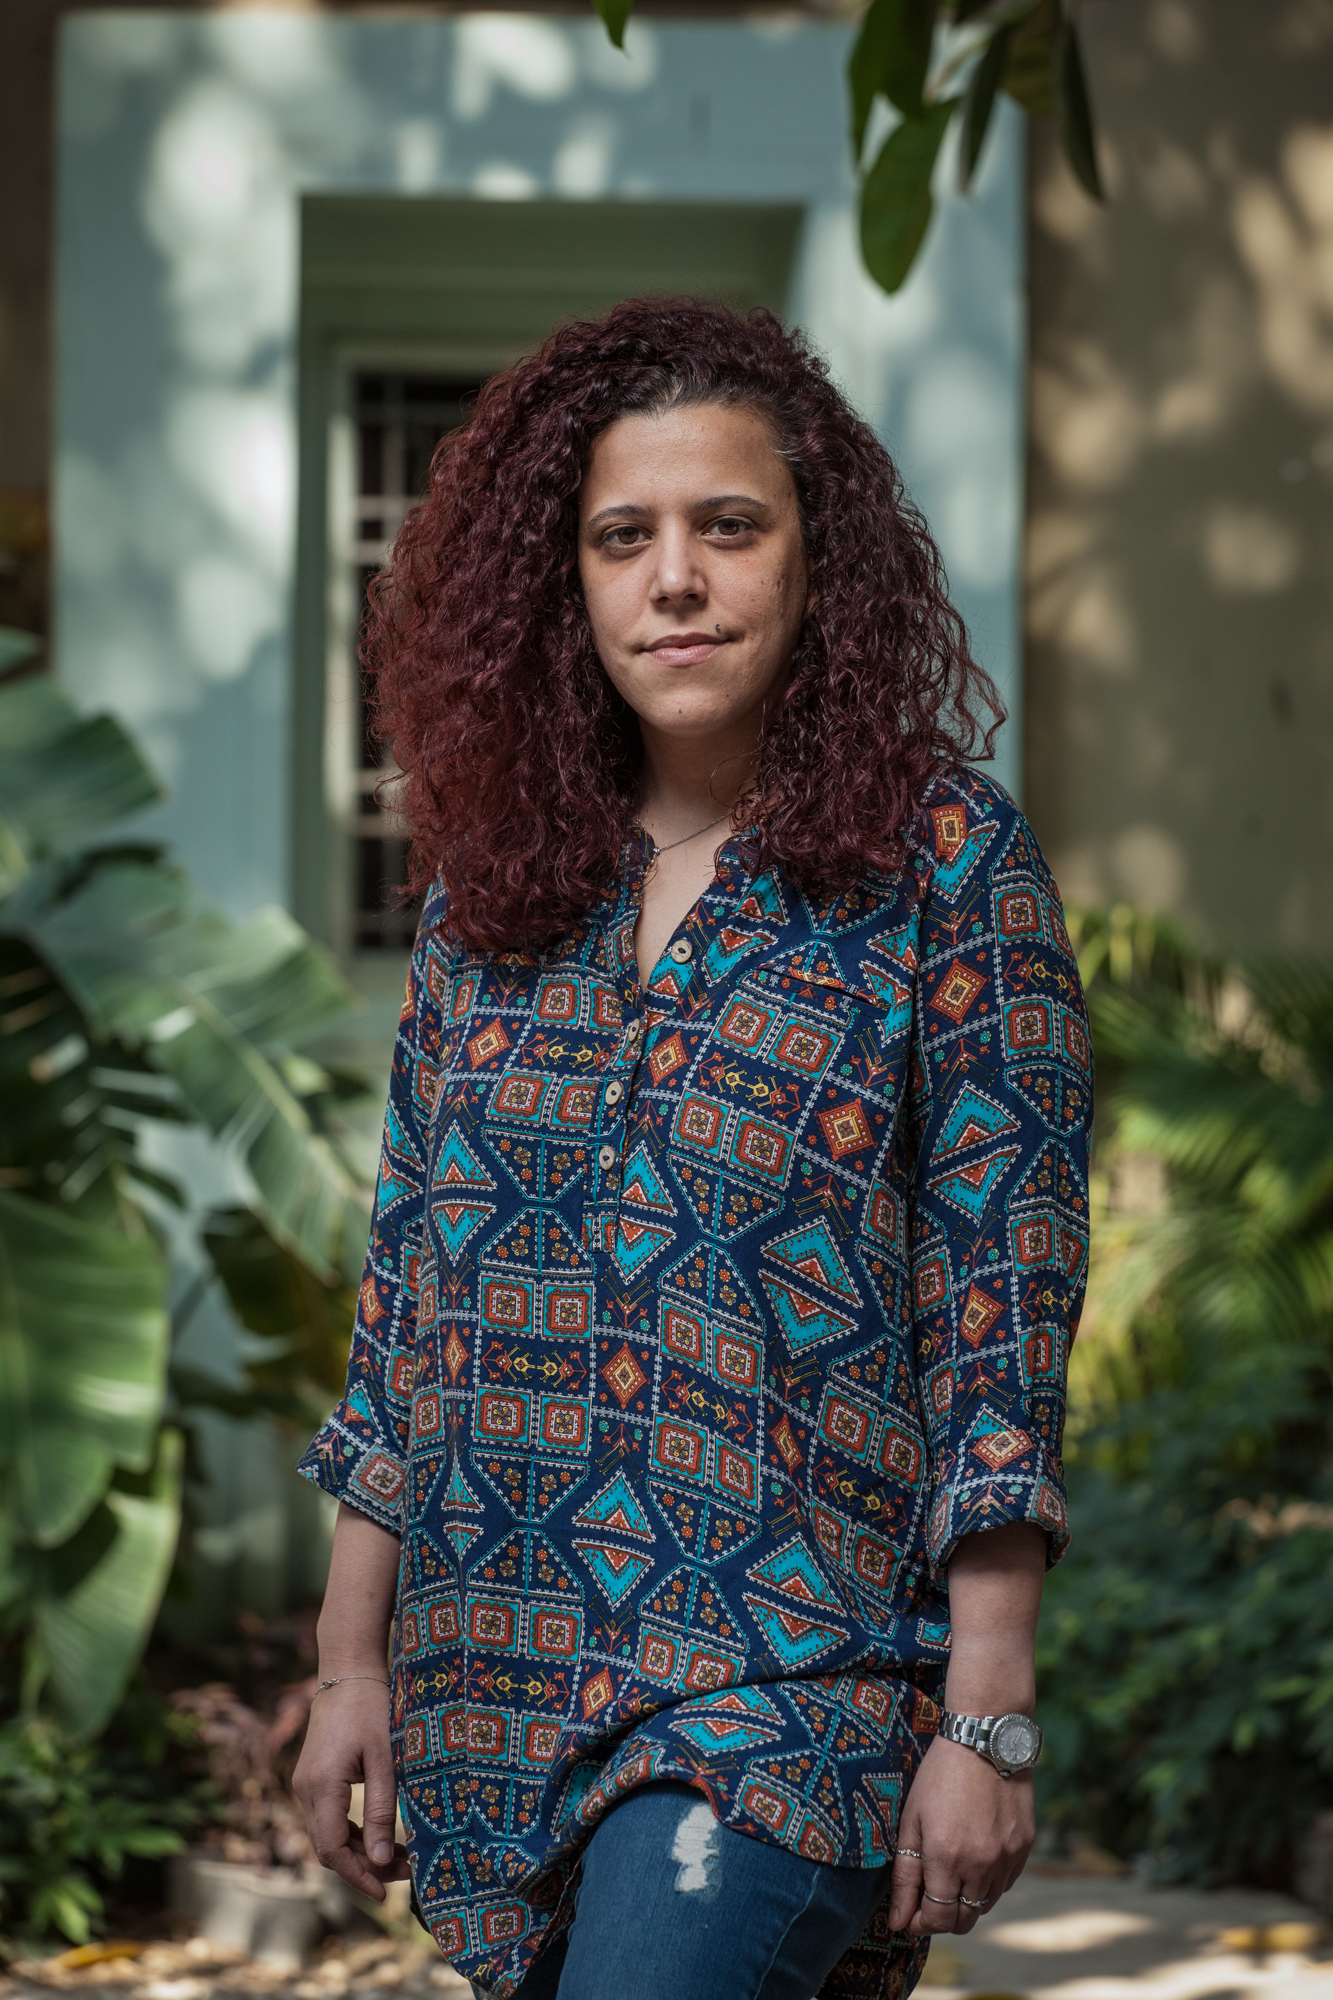 Portrait Amina Mansour in Maadi, 34 years old, is working in Advertising as a creative consultant, living at her mothers place in Maadi, Cairo. She travels a lot abroad an got a 5 years-visa.Frauen in Aegypten, Women in Egypt, Le Caire, Kairo, Cairo, Por